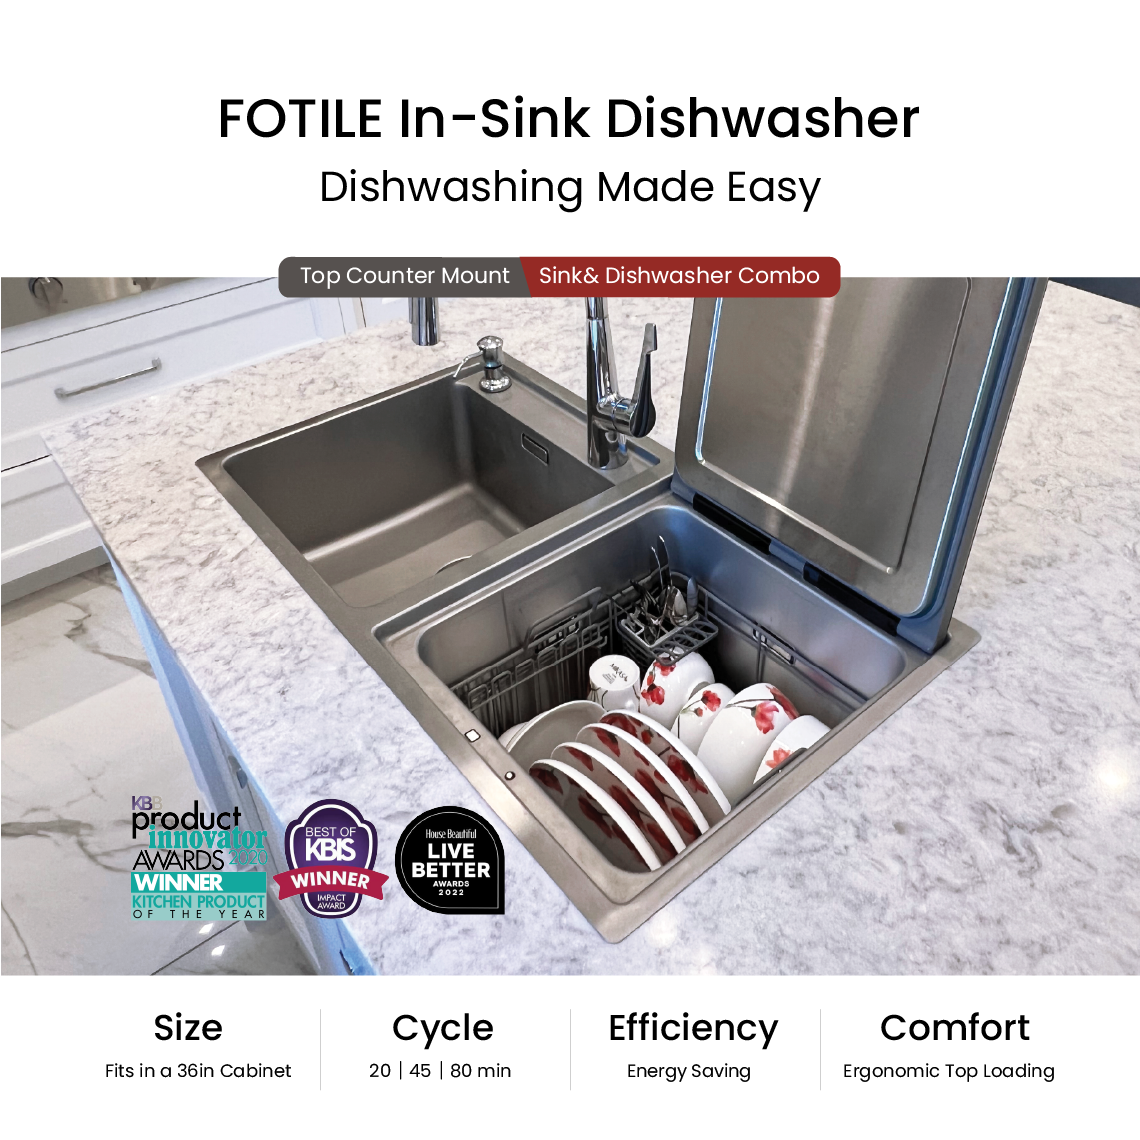 Dishwasher designed for modern living in compact spaces